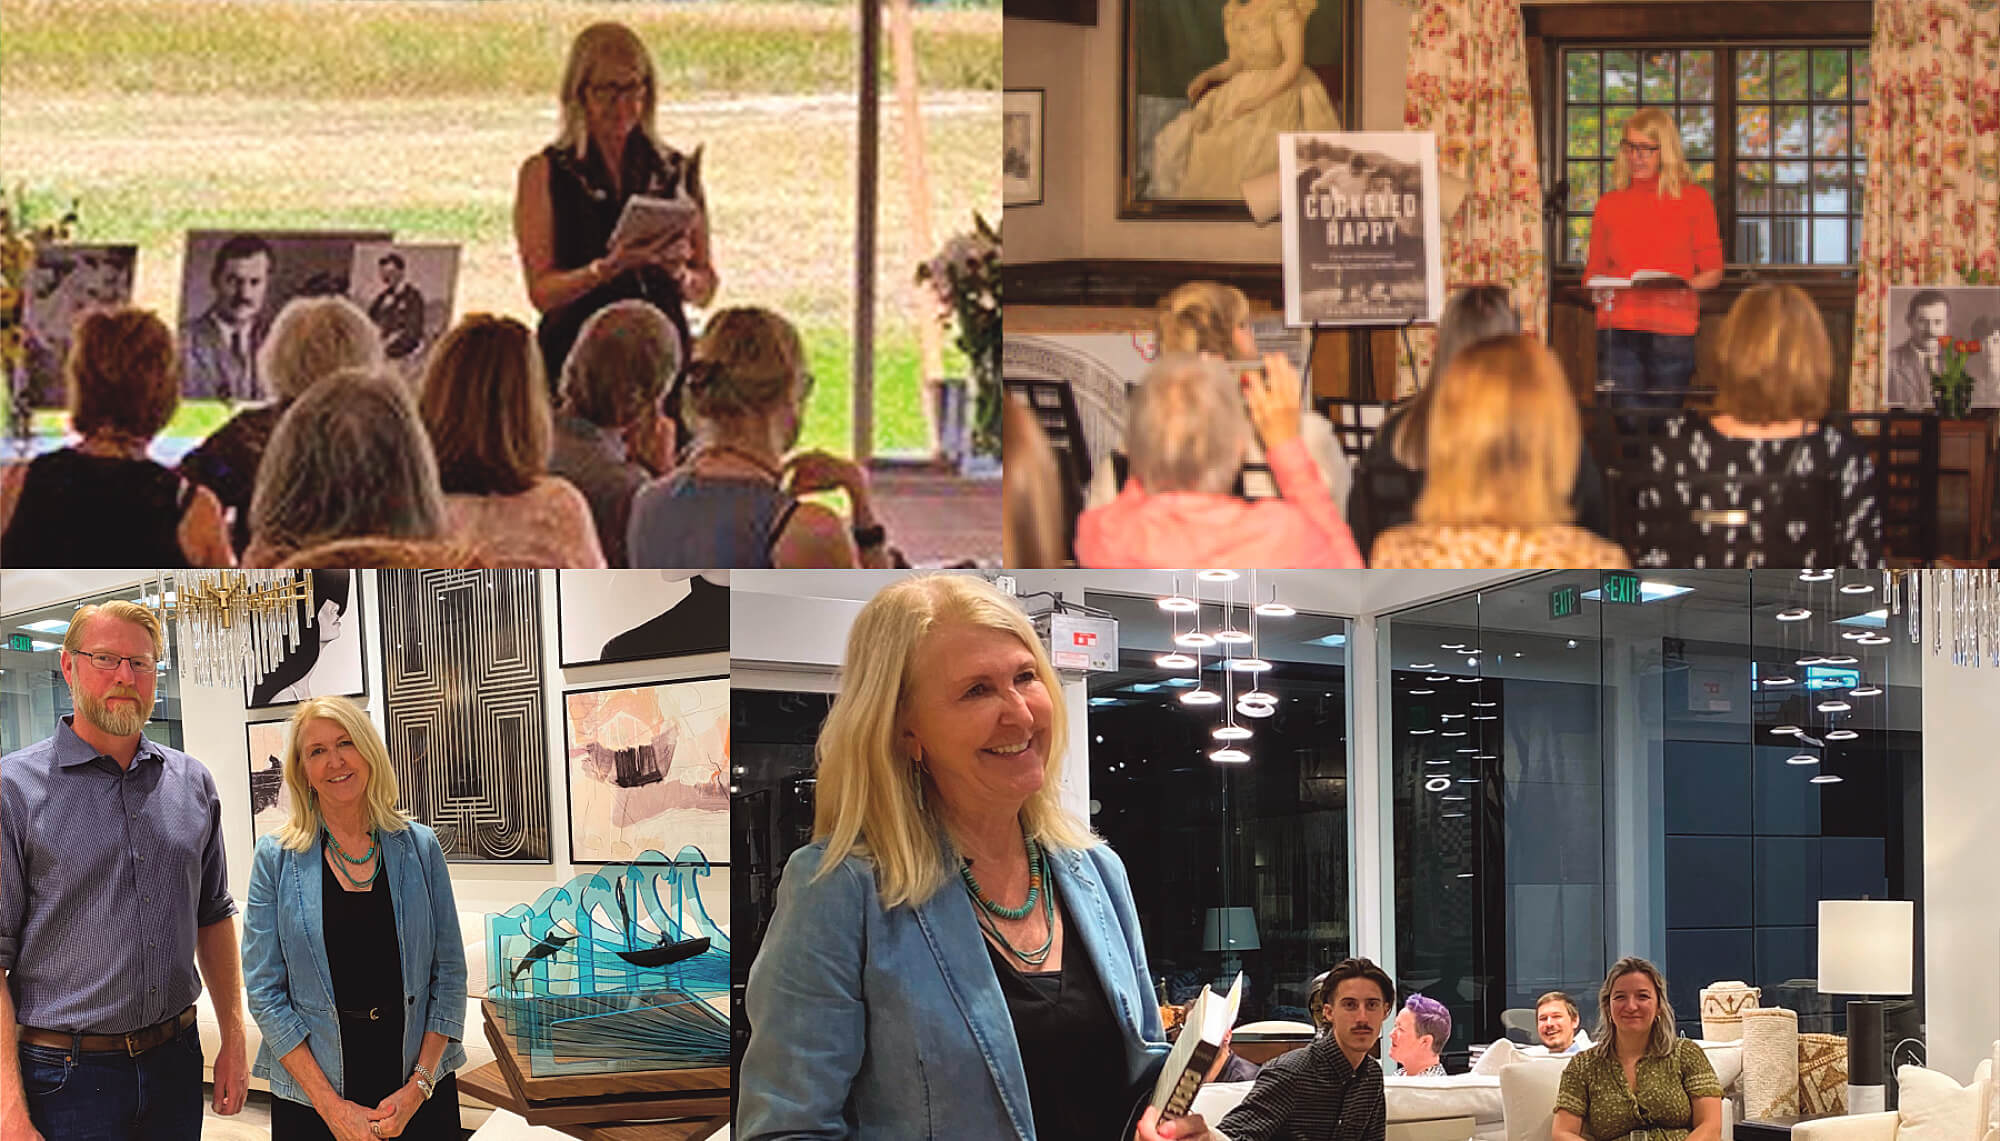 Photos from events with Ernes Hemingway Author Darla Worden